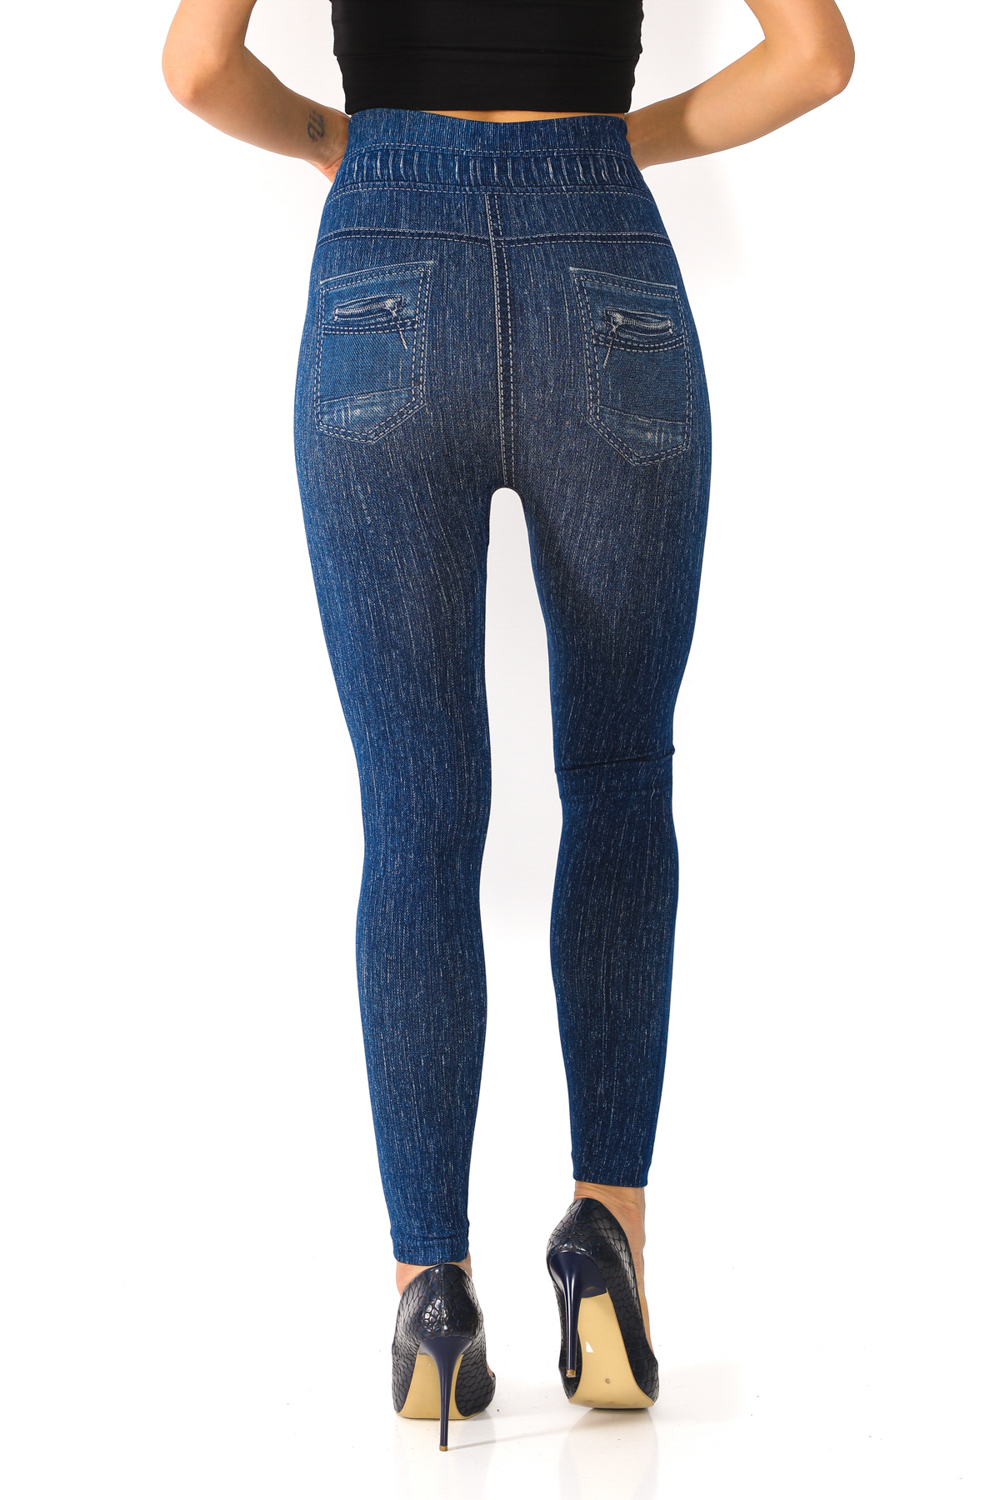 Denim Leggings with Ripped Look Tieable Drawstring - 3